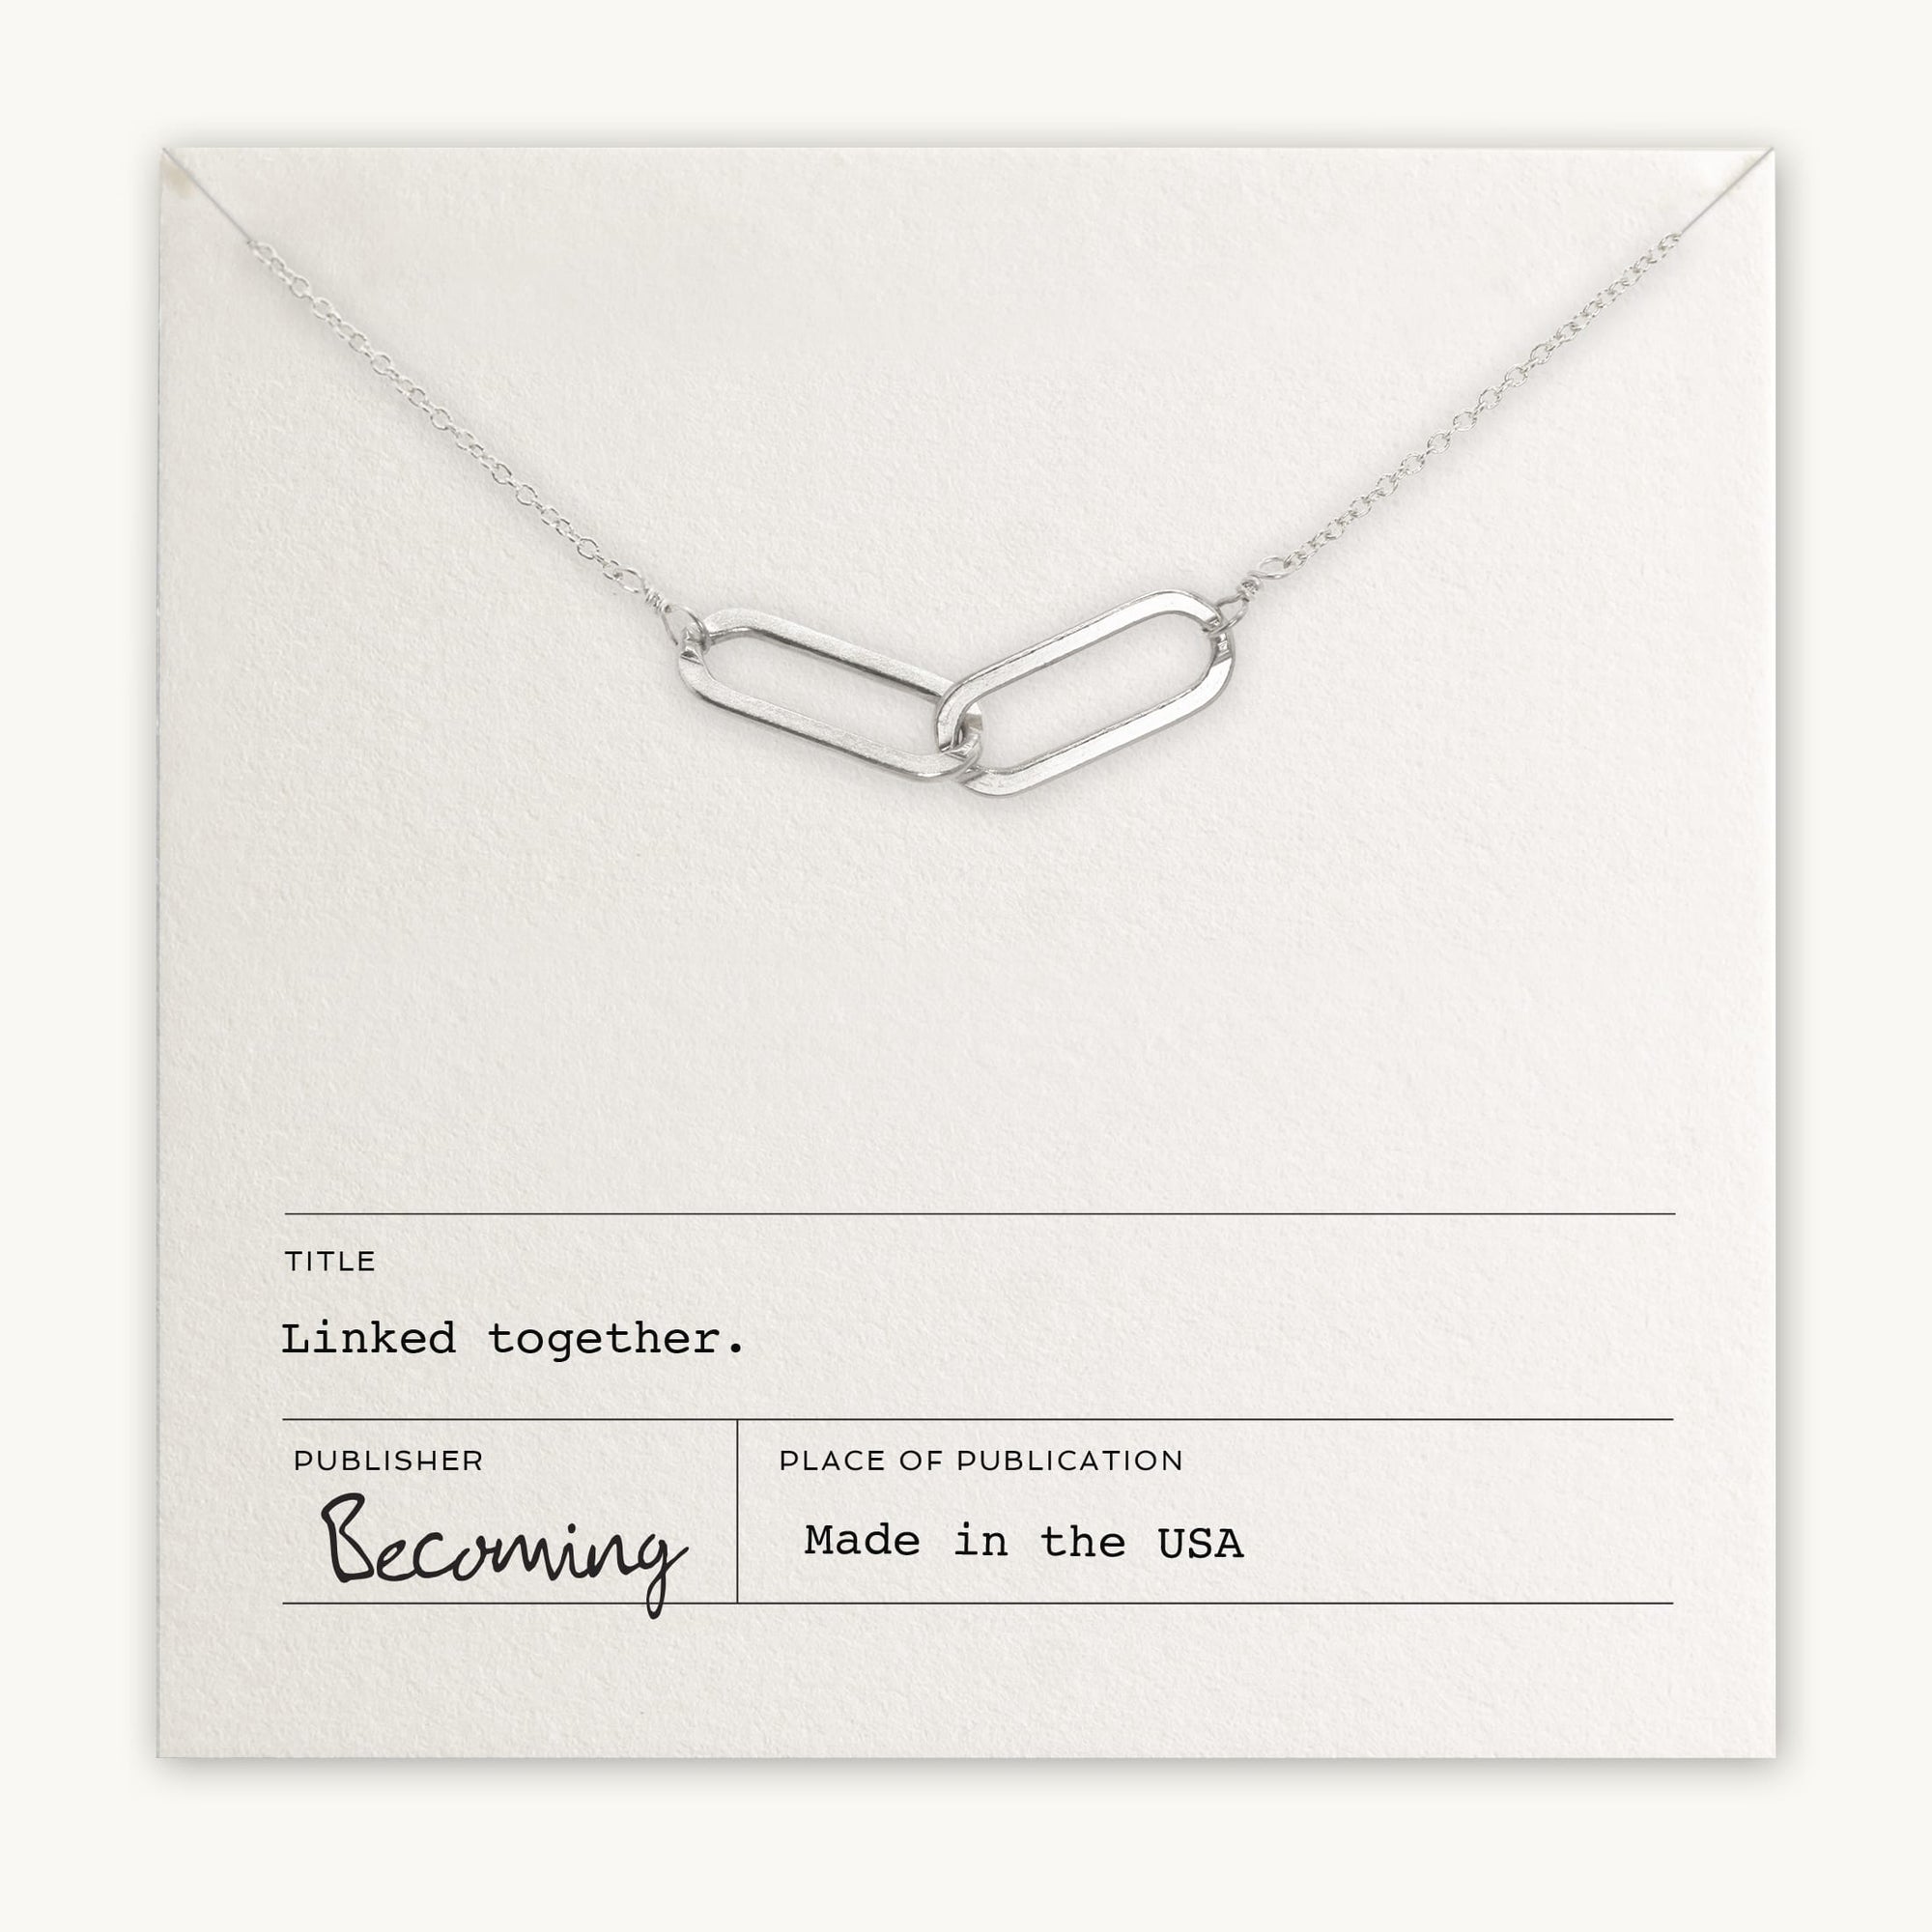 Linked Together Necklace by Becoming Jewelry with an interlinked design on a display card titled &quot;linked together,&quot; made in the USA.